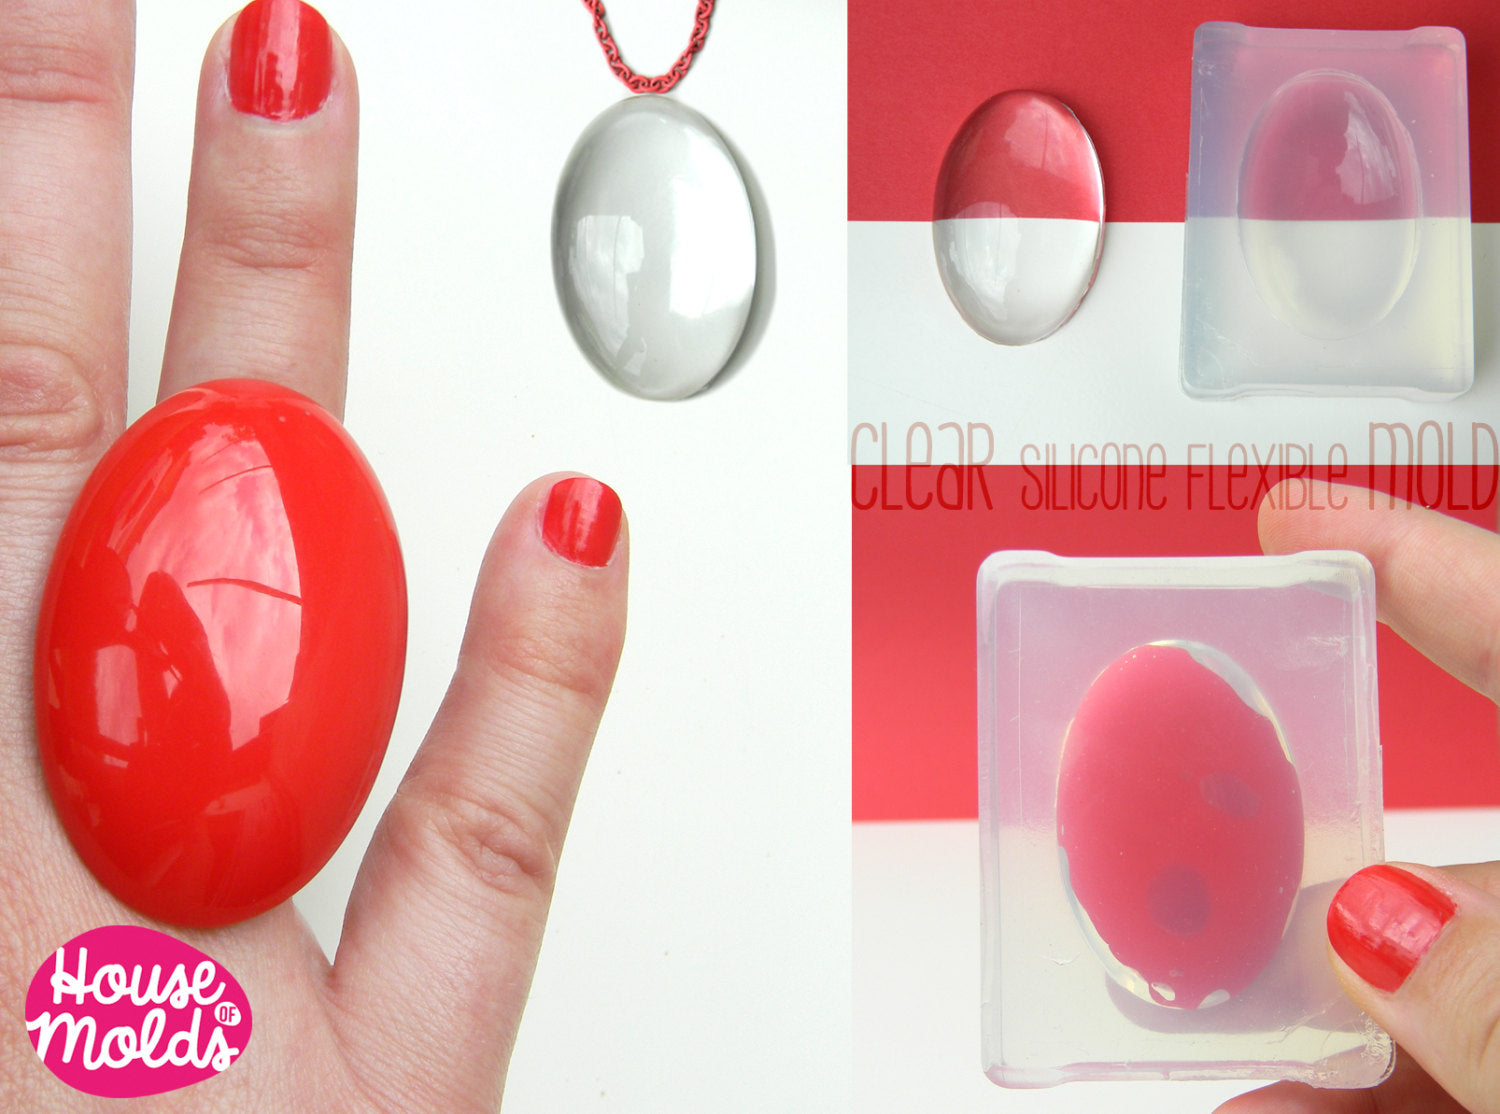 Clear silicone cabochon mold - 8 cavity - epoxy resin mold